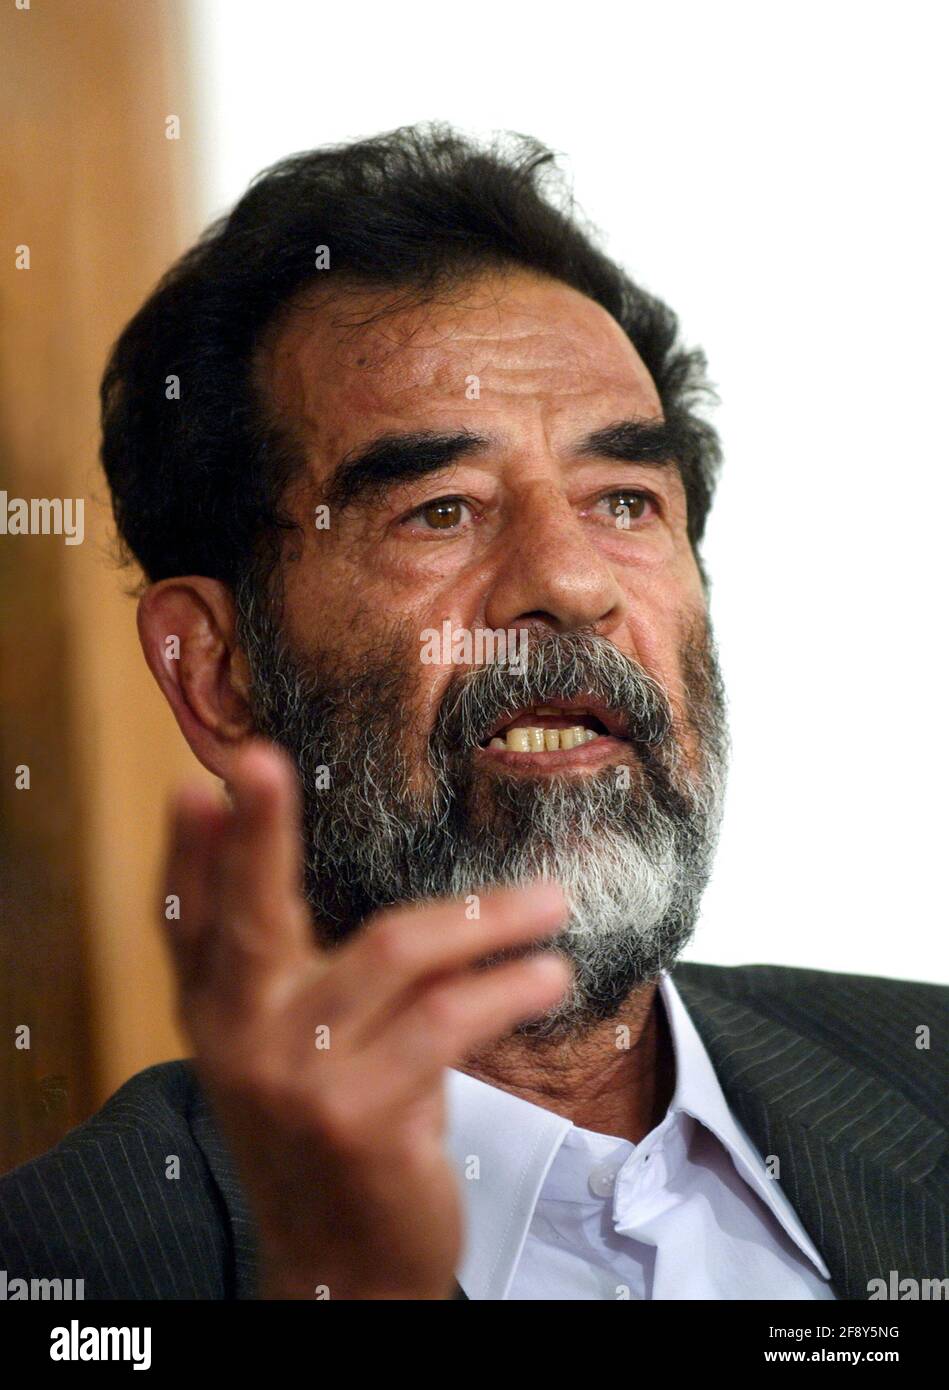 Saddam Hussein. Portrait of the former President of Iraq, Saddam Hussein Abd al-Majid al-Tikriti 1937-2006). US Army photograph taken when he was in front of a tribunal after his capture in Tikrit, Iraq. Photo taken in 2004. Stock Photo